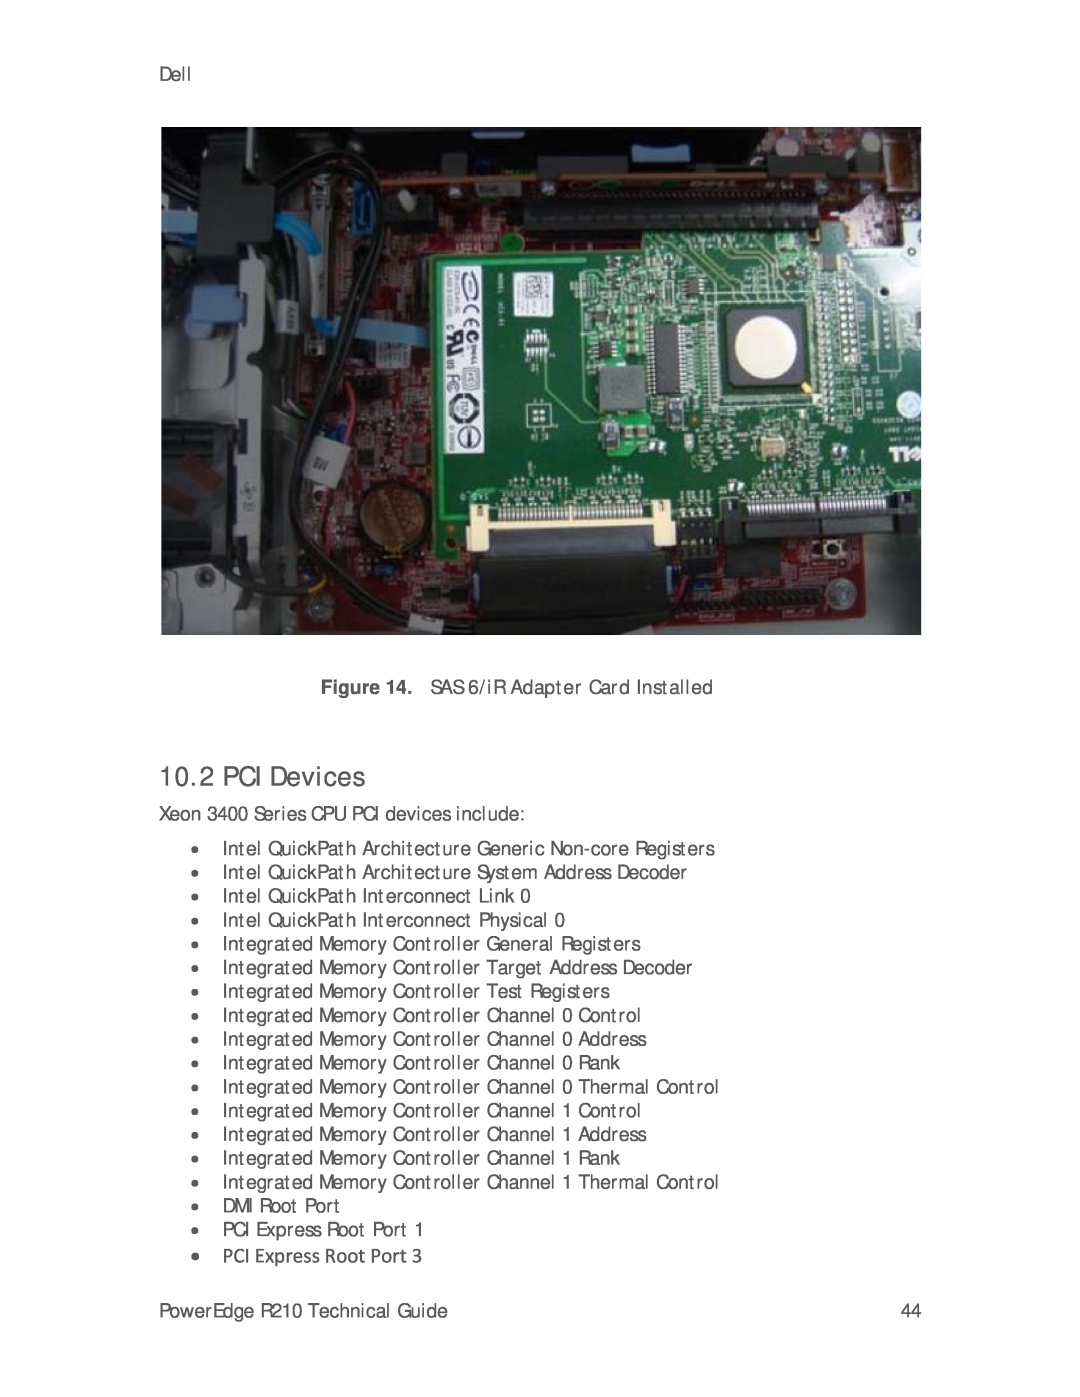 Dell R210 manual PCI Devices, PCI Express Root Port 